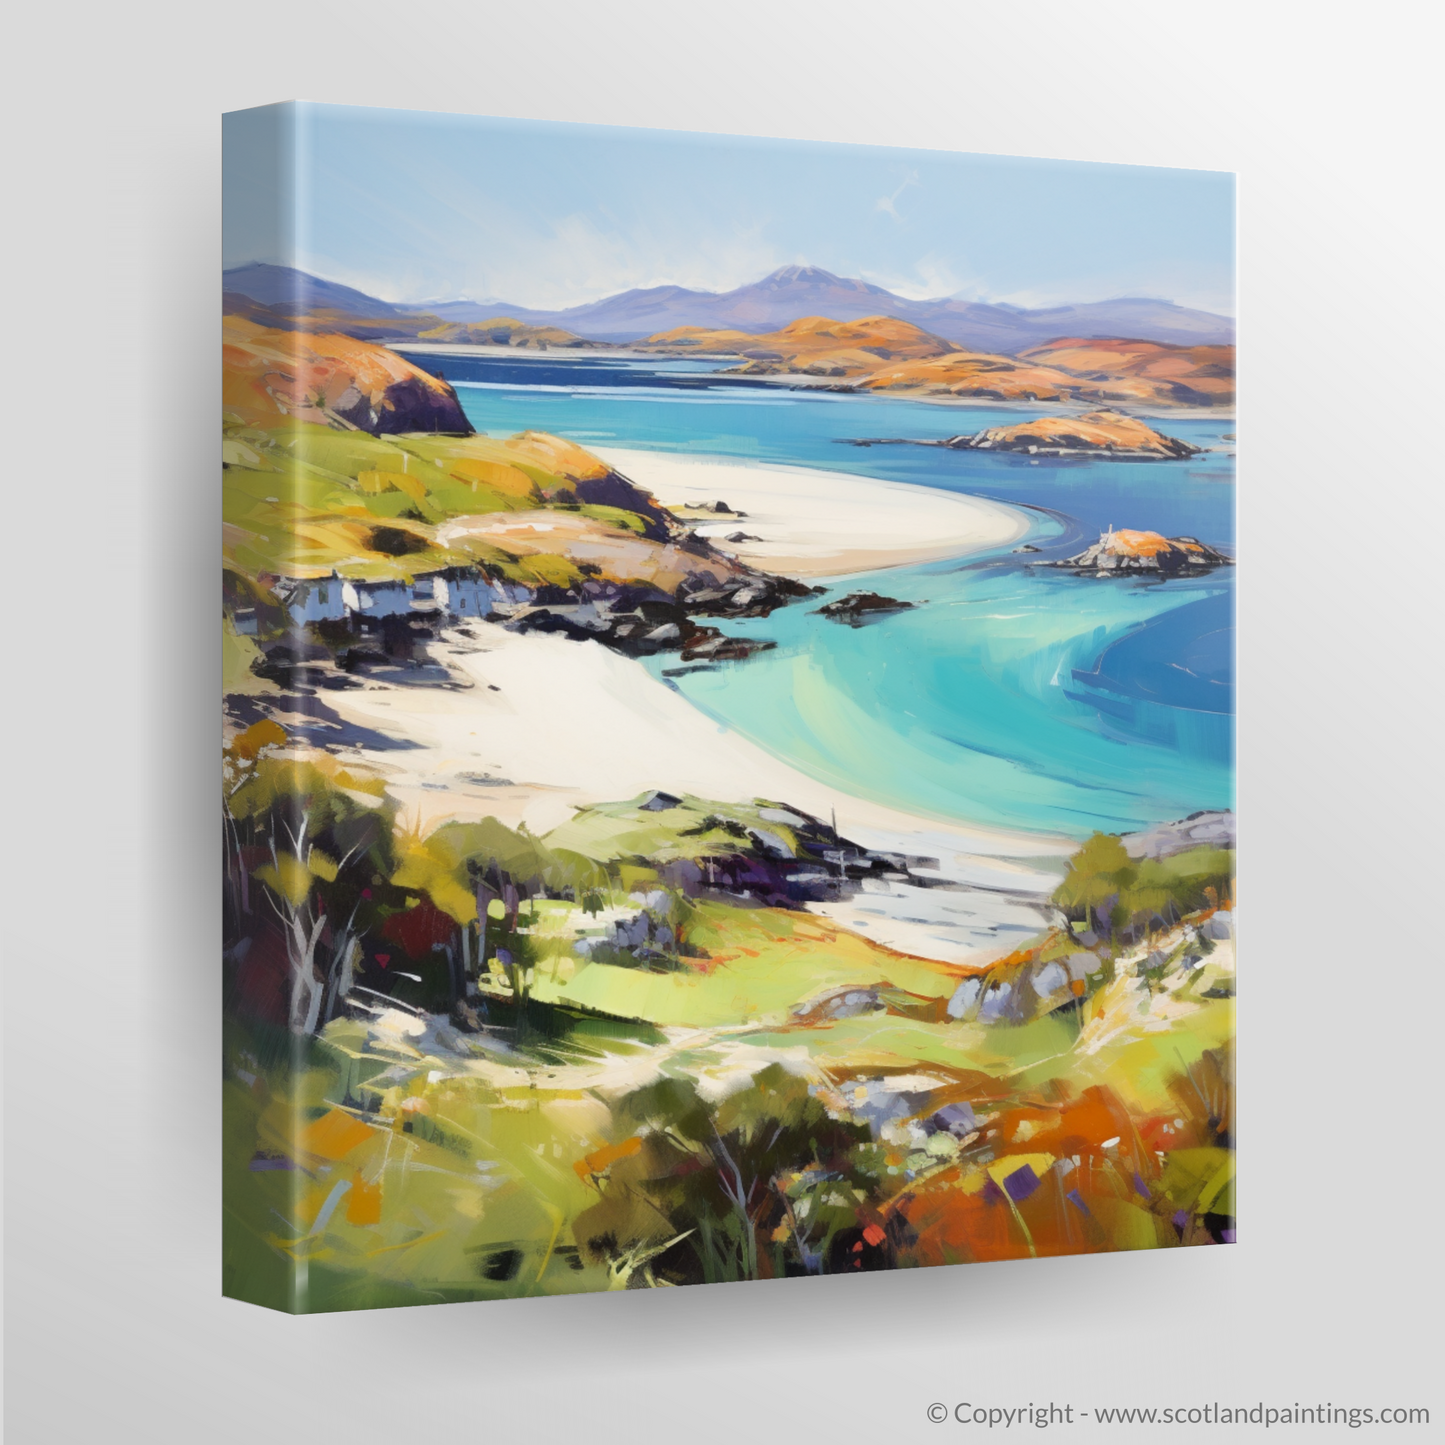 Lochinver Bay Reverie: An Abstract Impressionist Tribute to Scotland's Coastal Charm